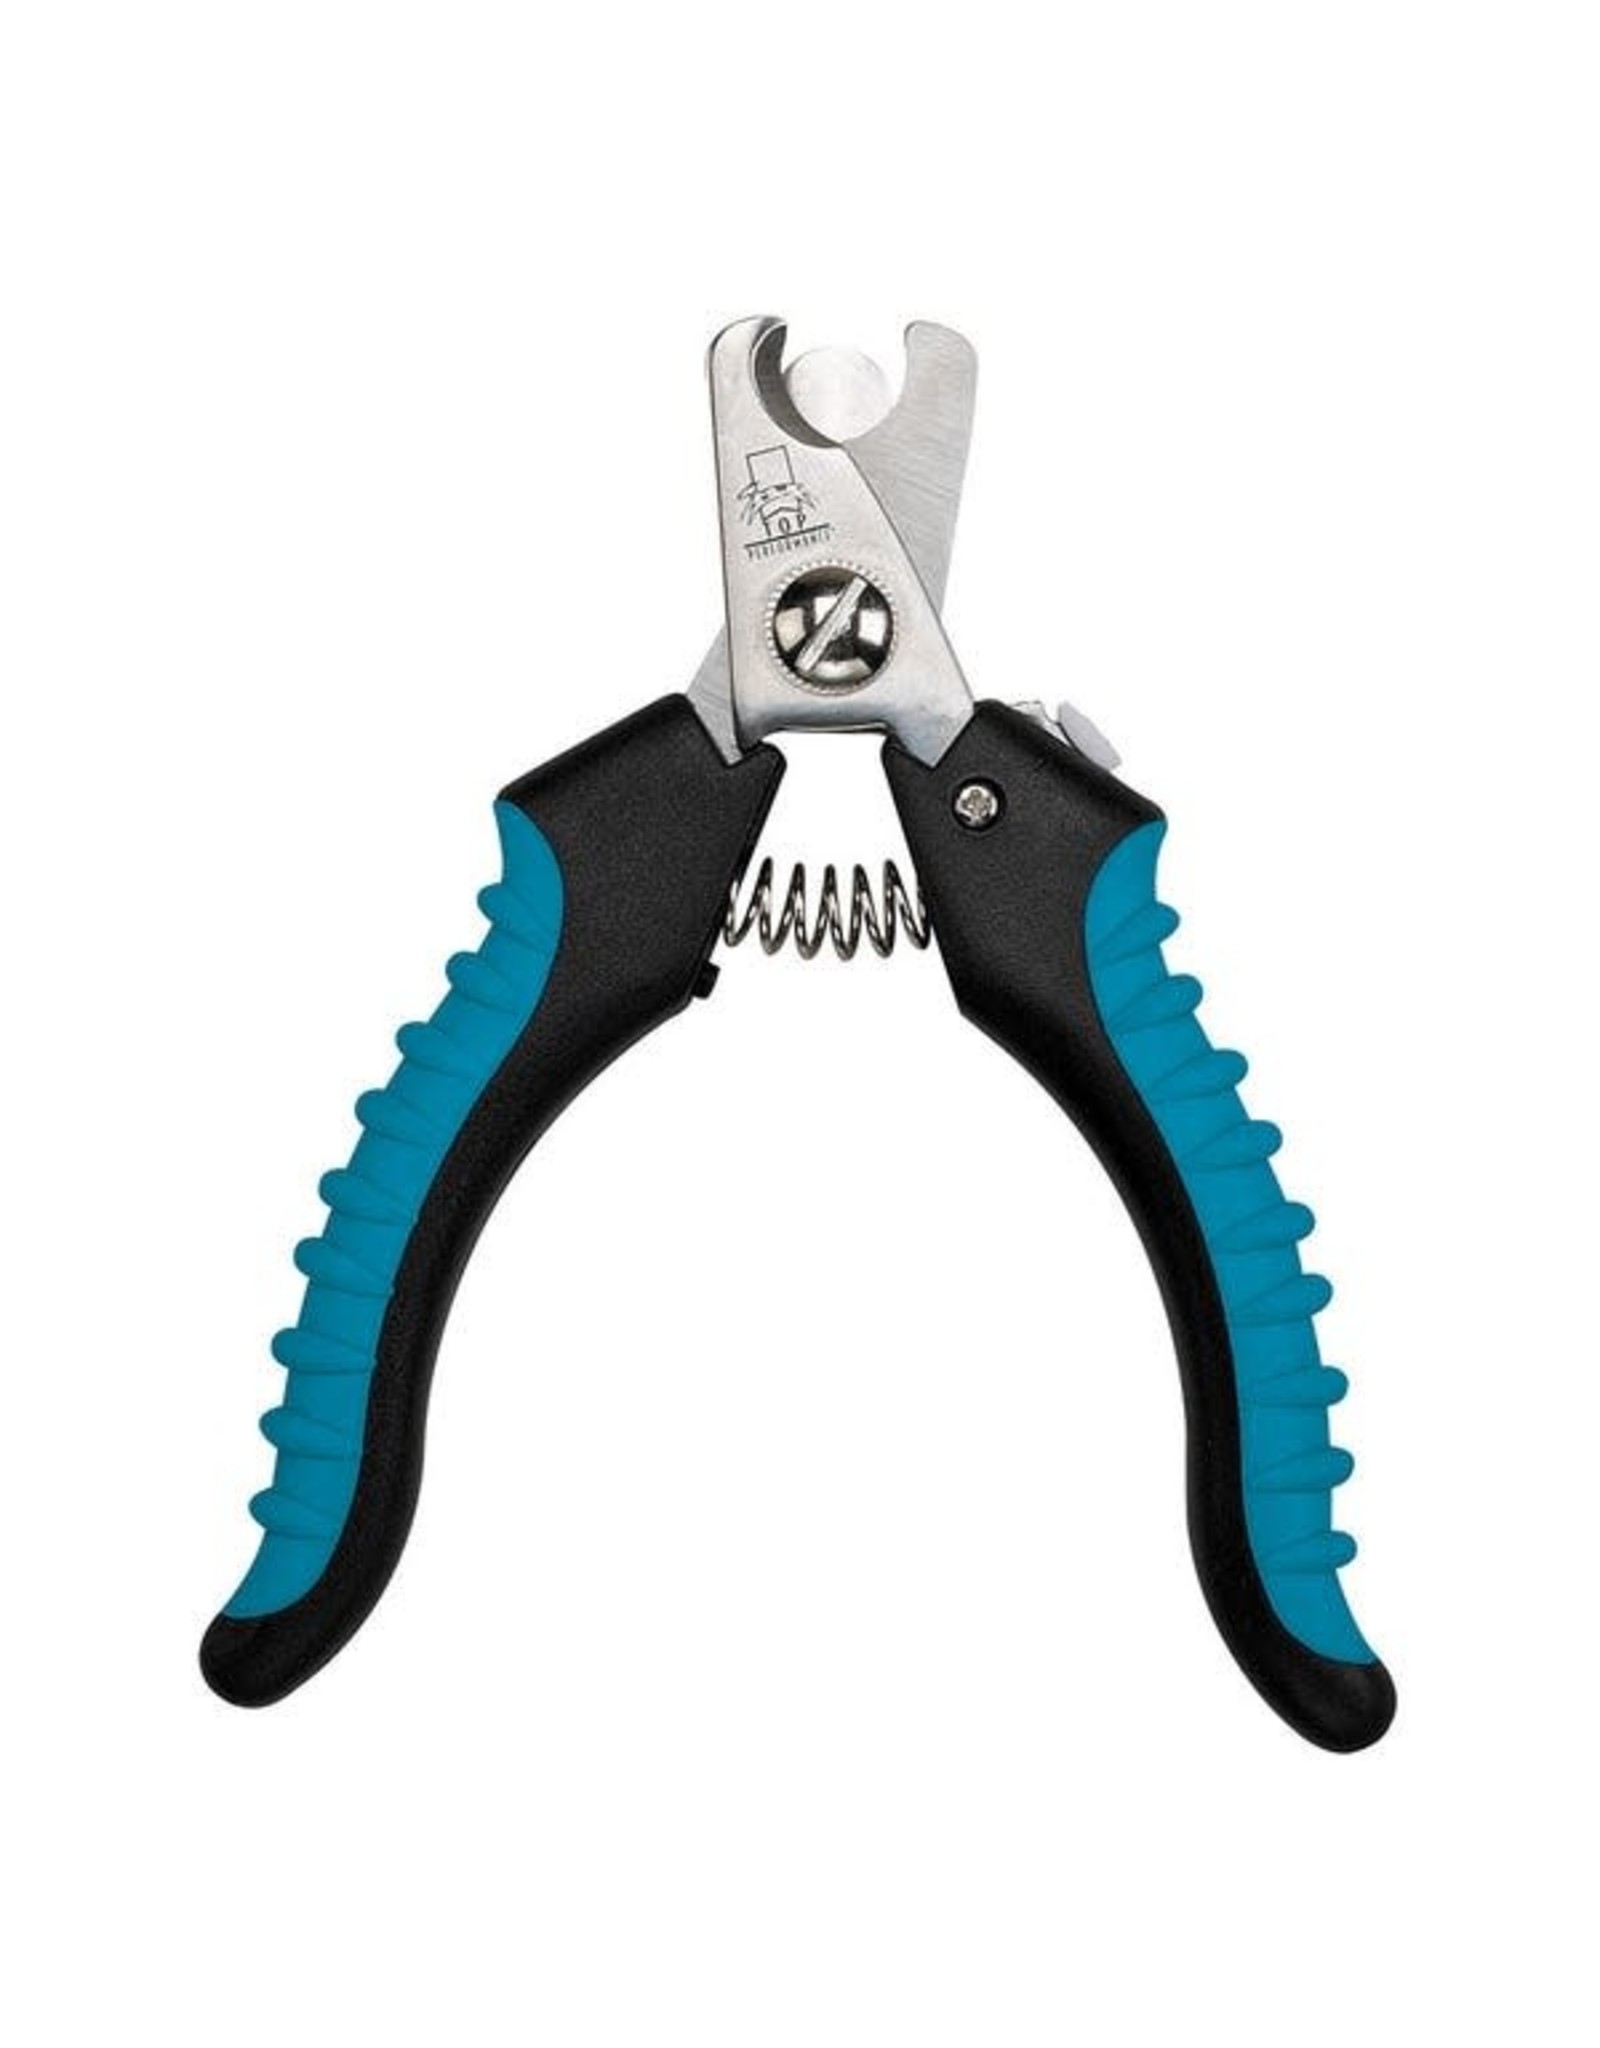 Master Grooming Master Grooming Tools Large Teal Ergonomic Nail Clippers